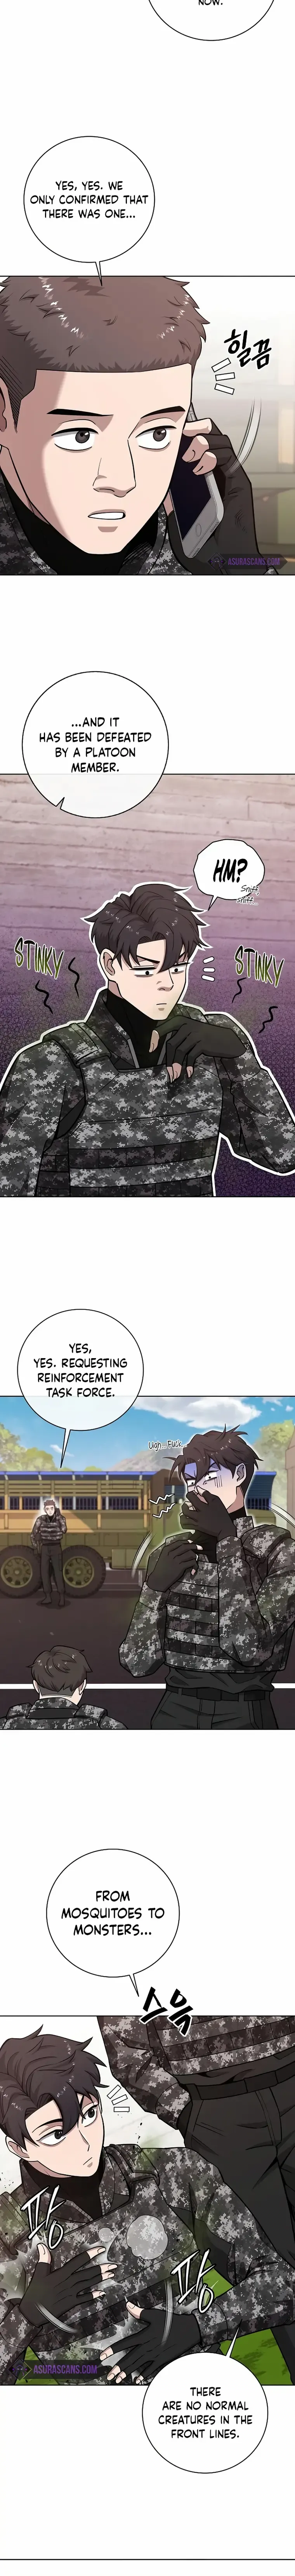 The Dark Mage’S Return To Enlistment - Page 2